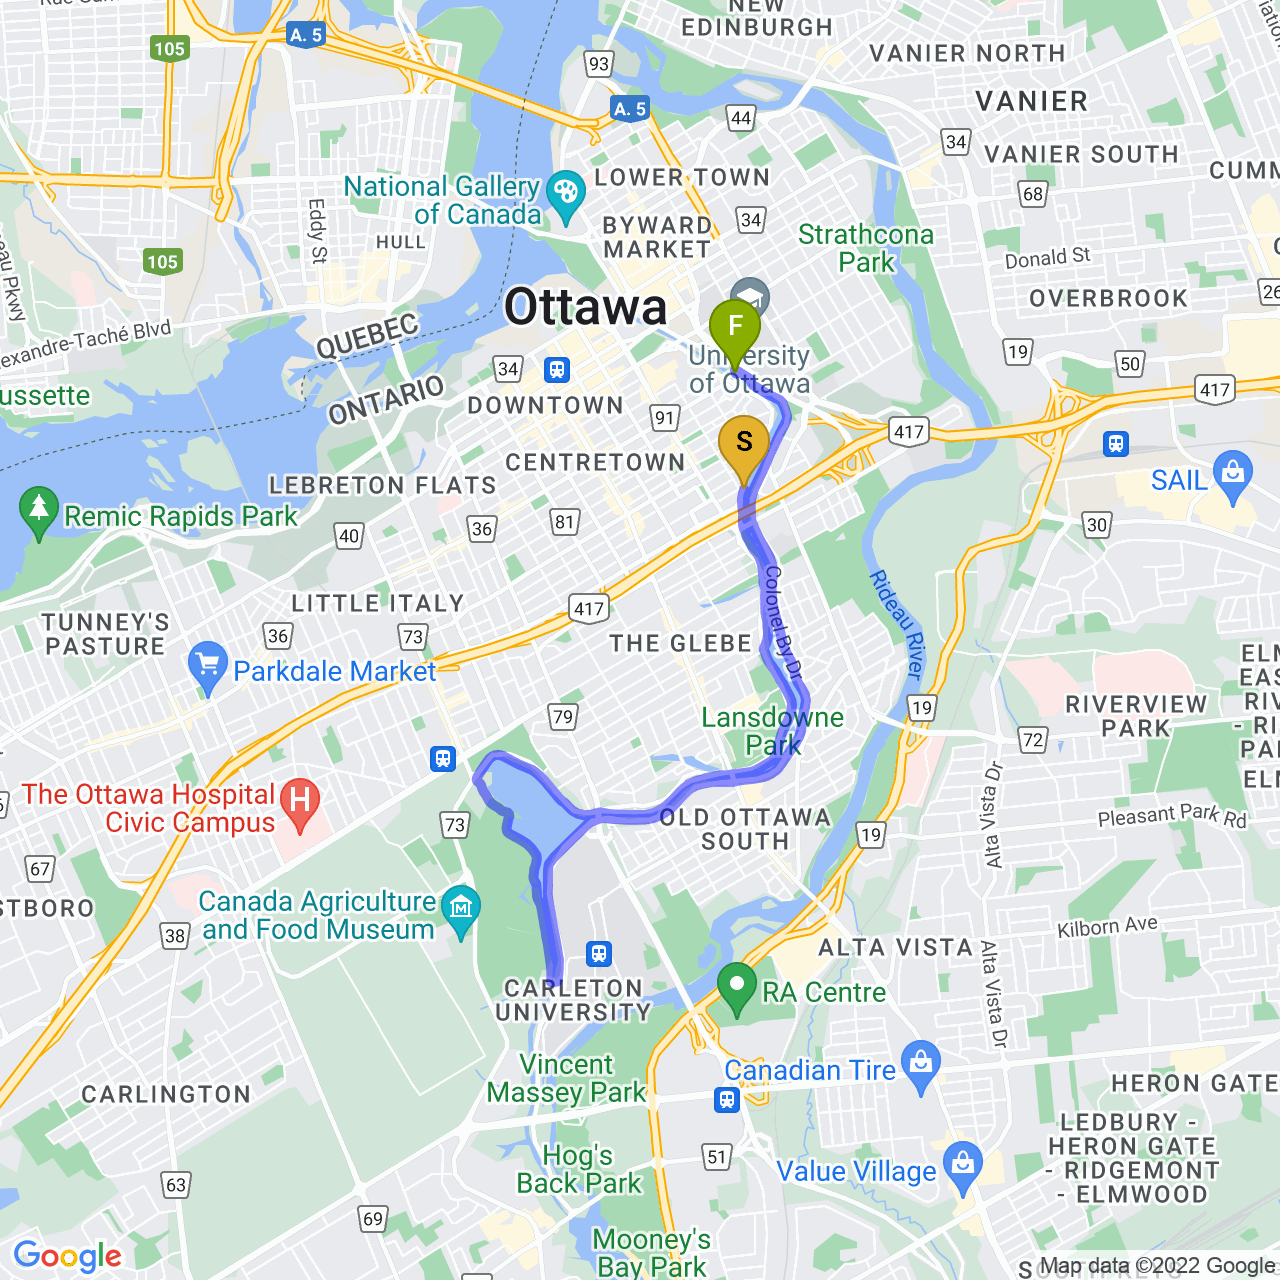 map of Evening Ride